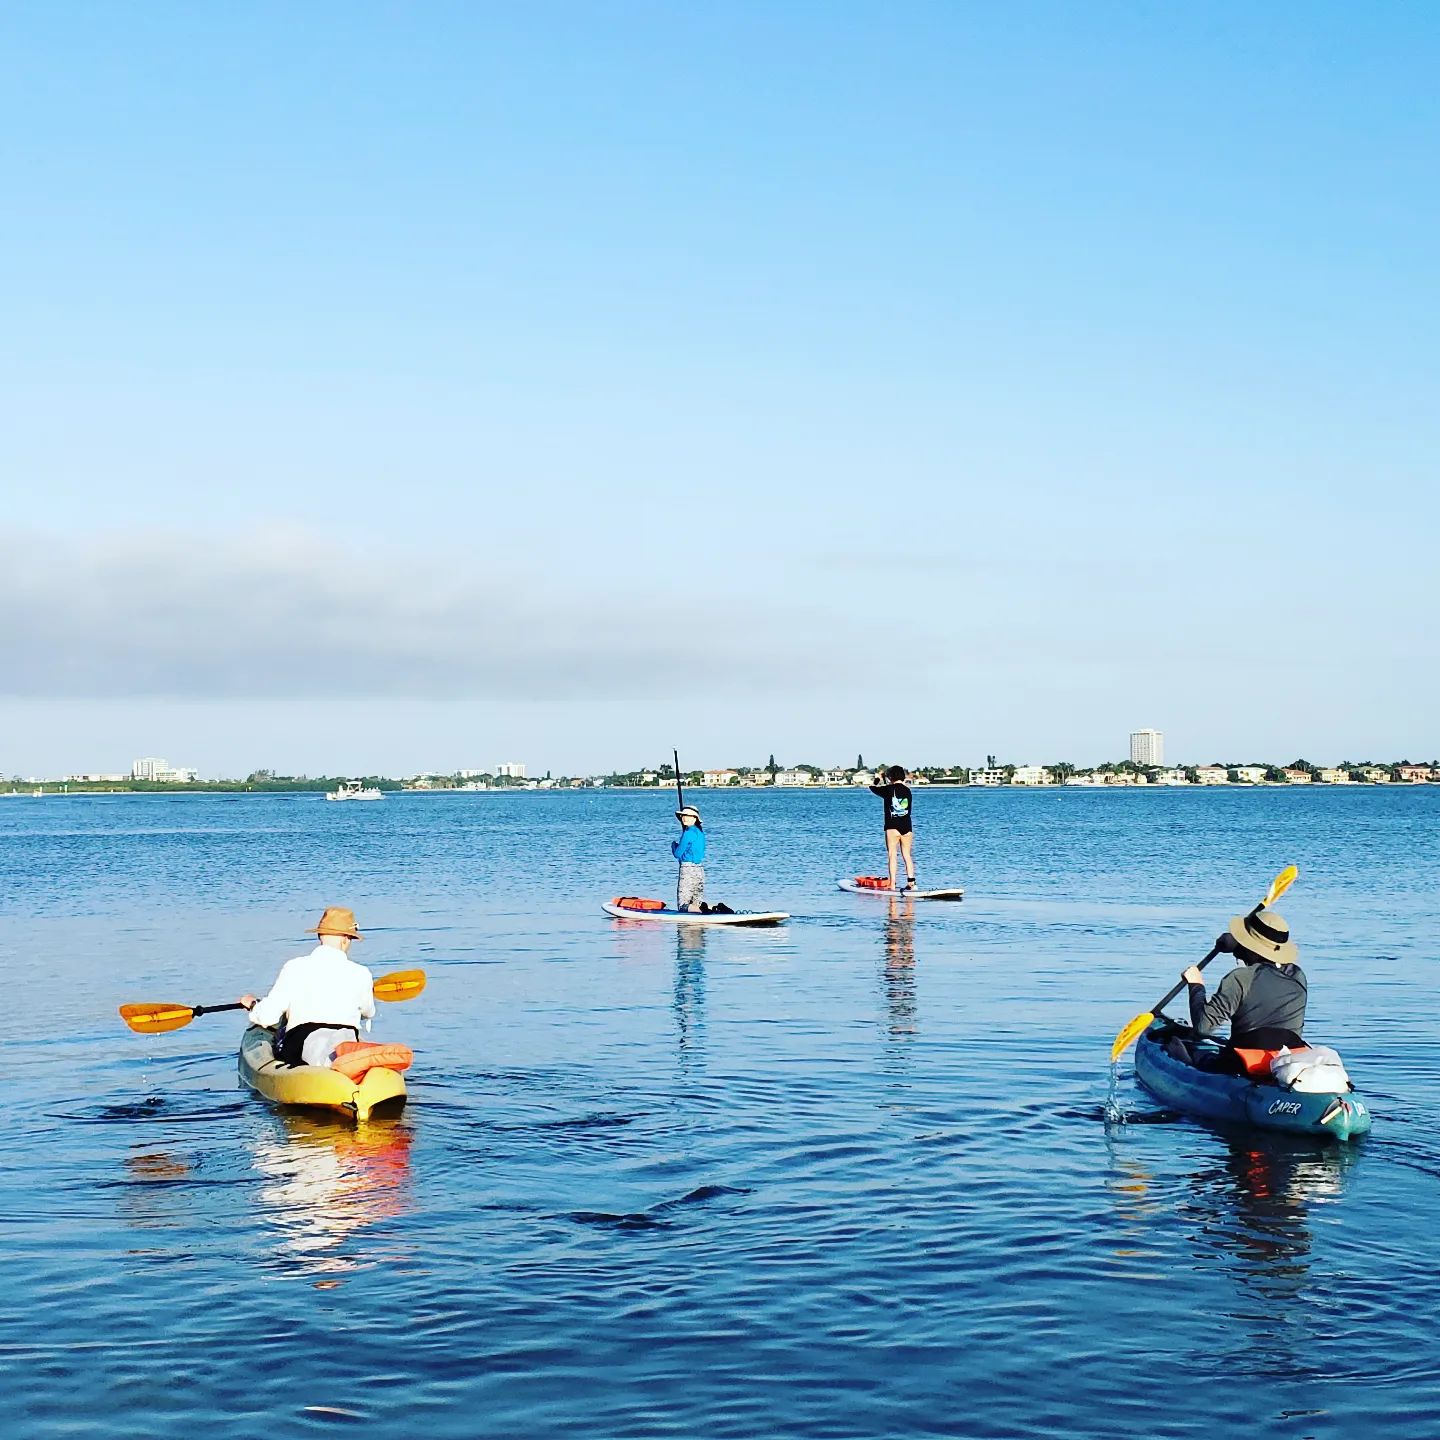 A nice calm morning for a paddle on Sarasota bay! @siestakeypaddleboards #siestakeypaddleboards #siestakey